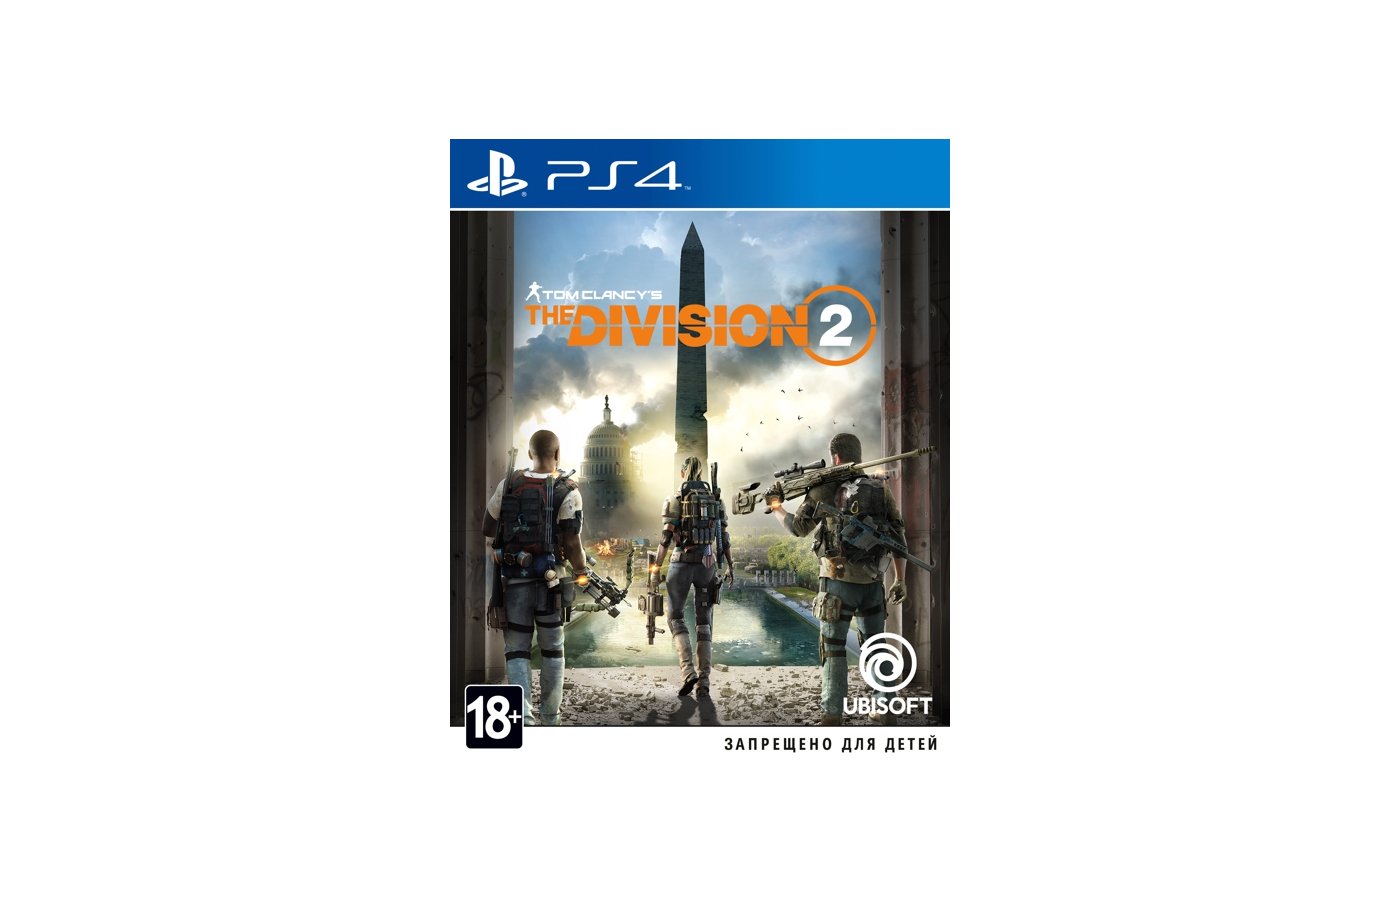 The division ps4. Division 2 ps4. Дивизион 2 на пс4. Диск ПС 4 Tom Clancy's the Division 2. The Division 2 Gold Edition ps4 дисковая версия.